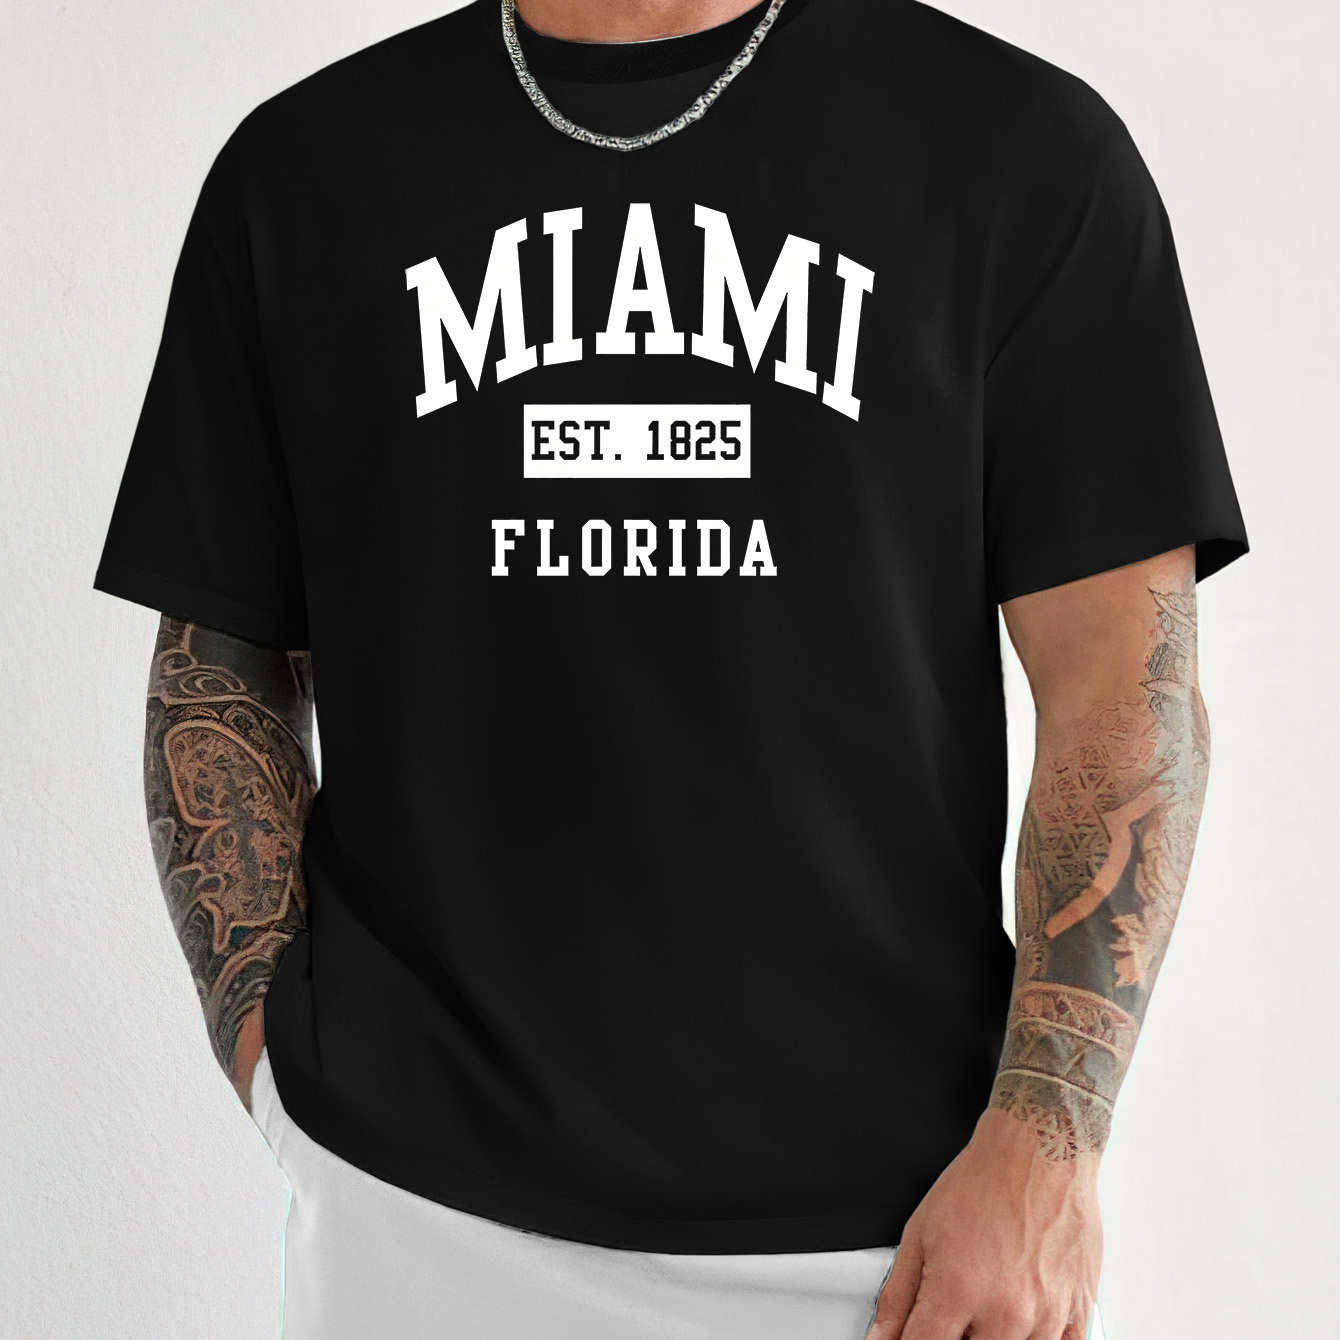 

Miami "creative Print Casual Novelty T-shirt For Men, Short Sleeve Summer& Spring Top, Comfort Fit, Stylish Streetwear Crew Neck Tee For Daily Wear